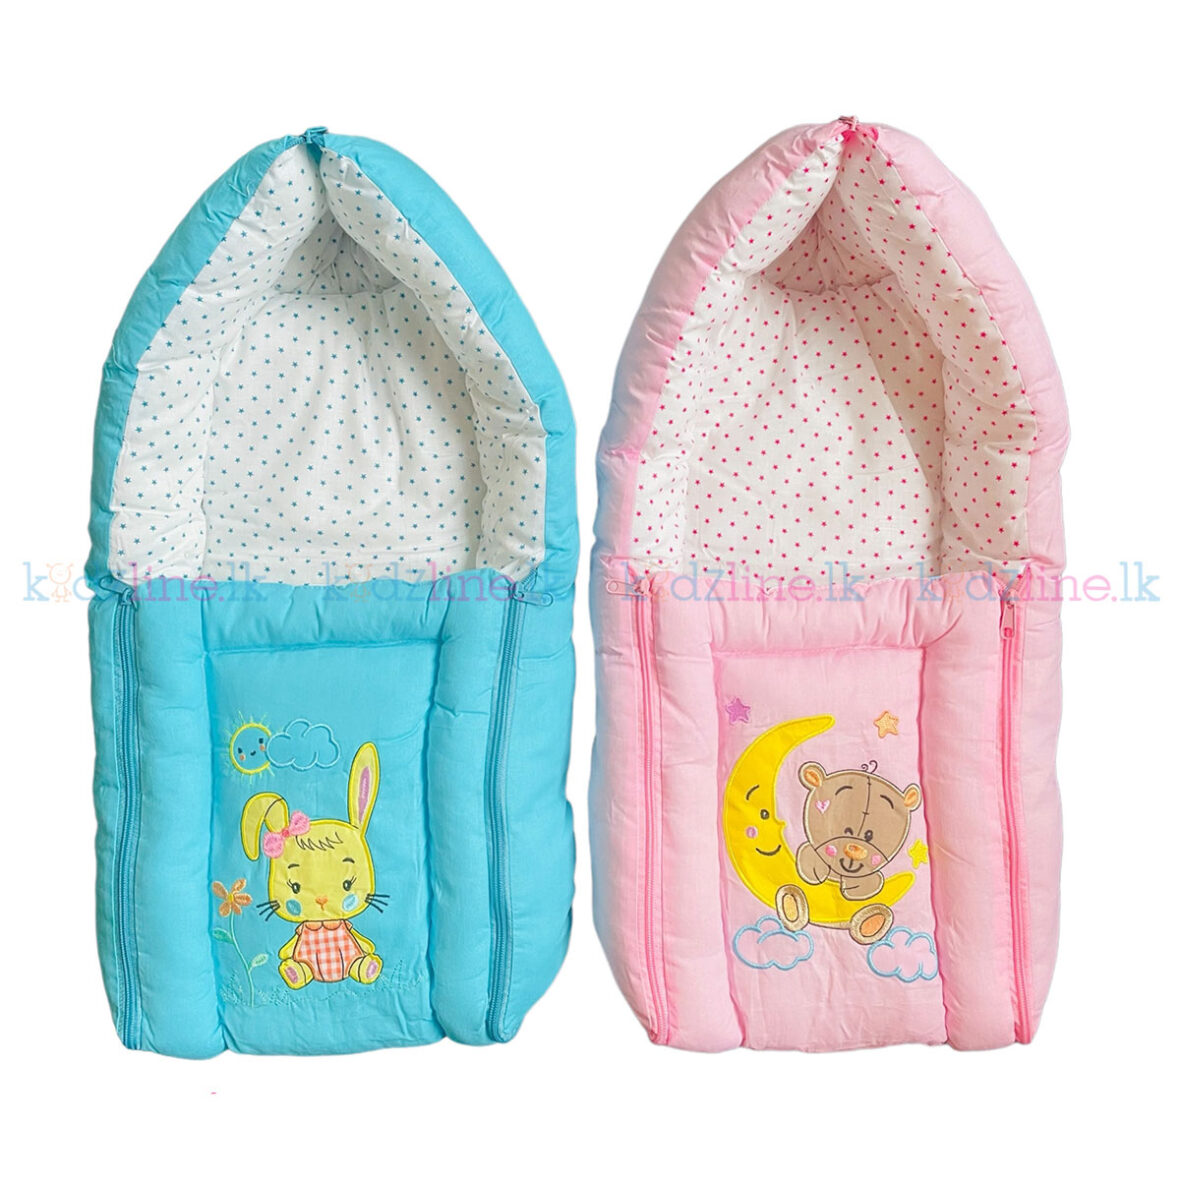 100% Cotton Material Baby Embroidery Sleeping Bag